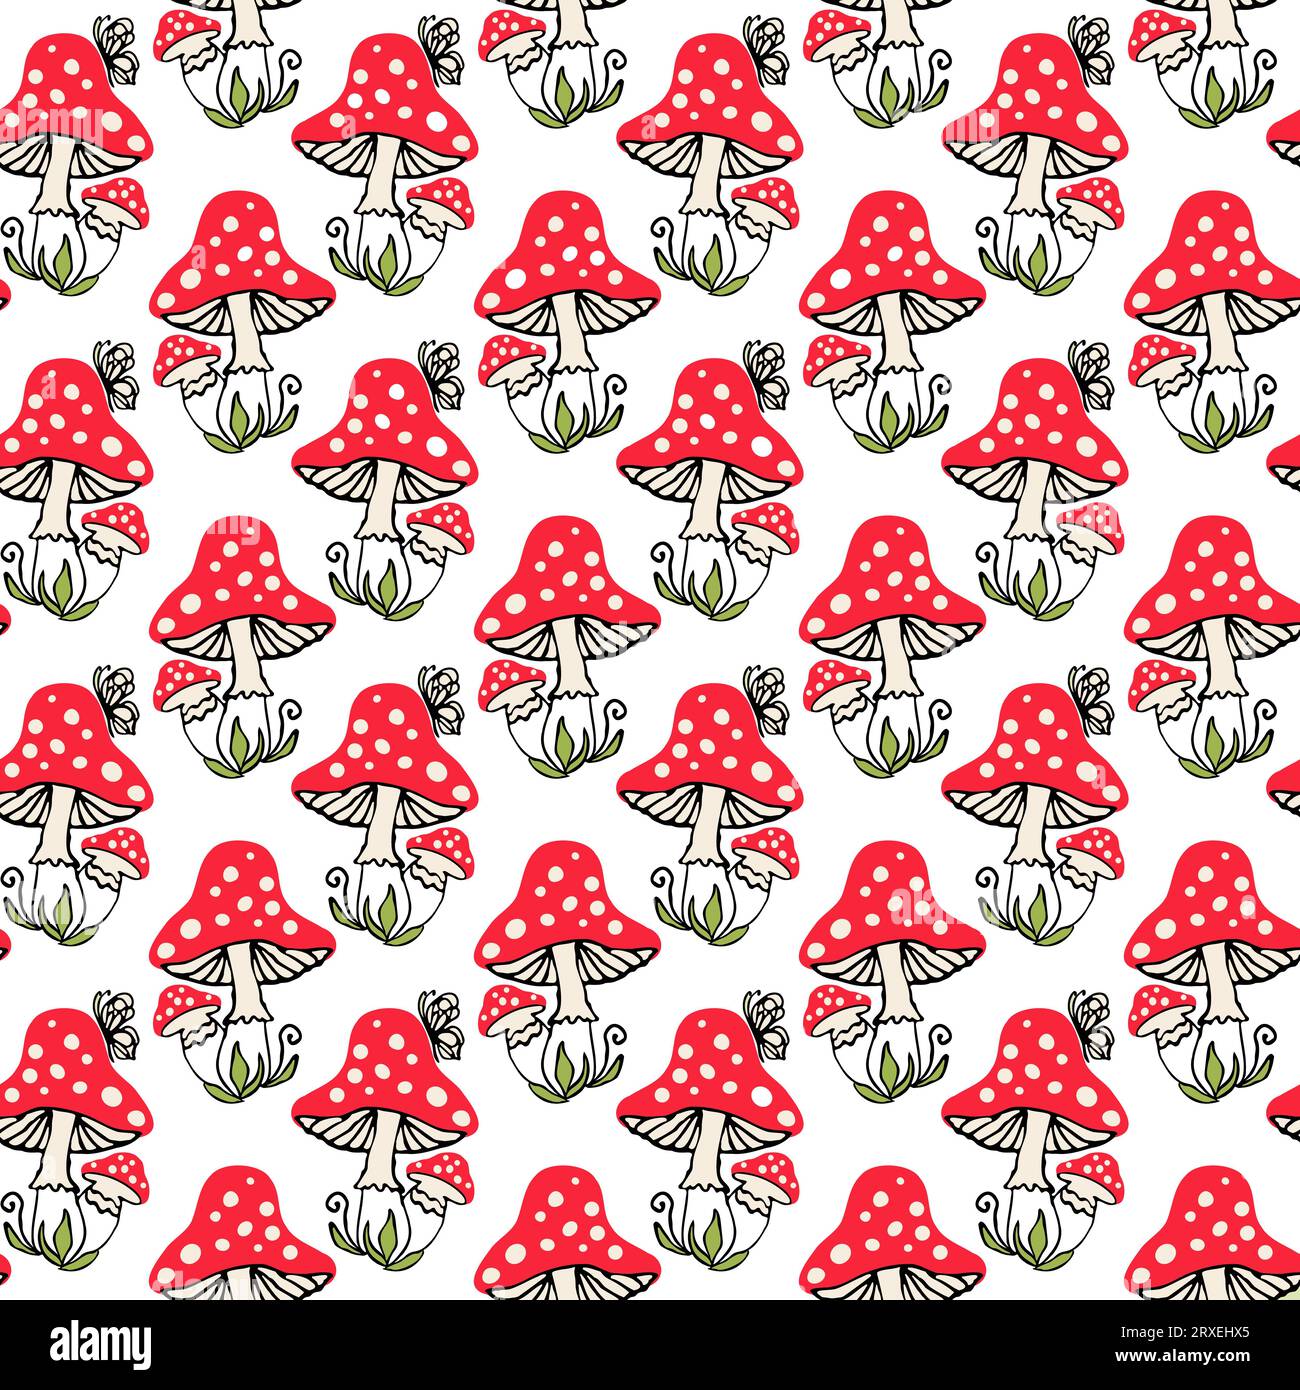 Autumn seamless pattern with red mushrooms for textile design or wallpaper, scrapbook. vector background with hand drawn element. Stock Vector